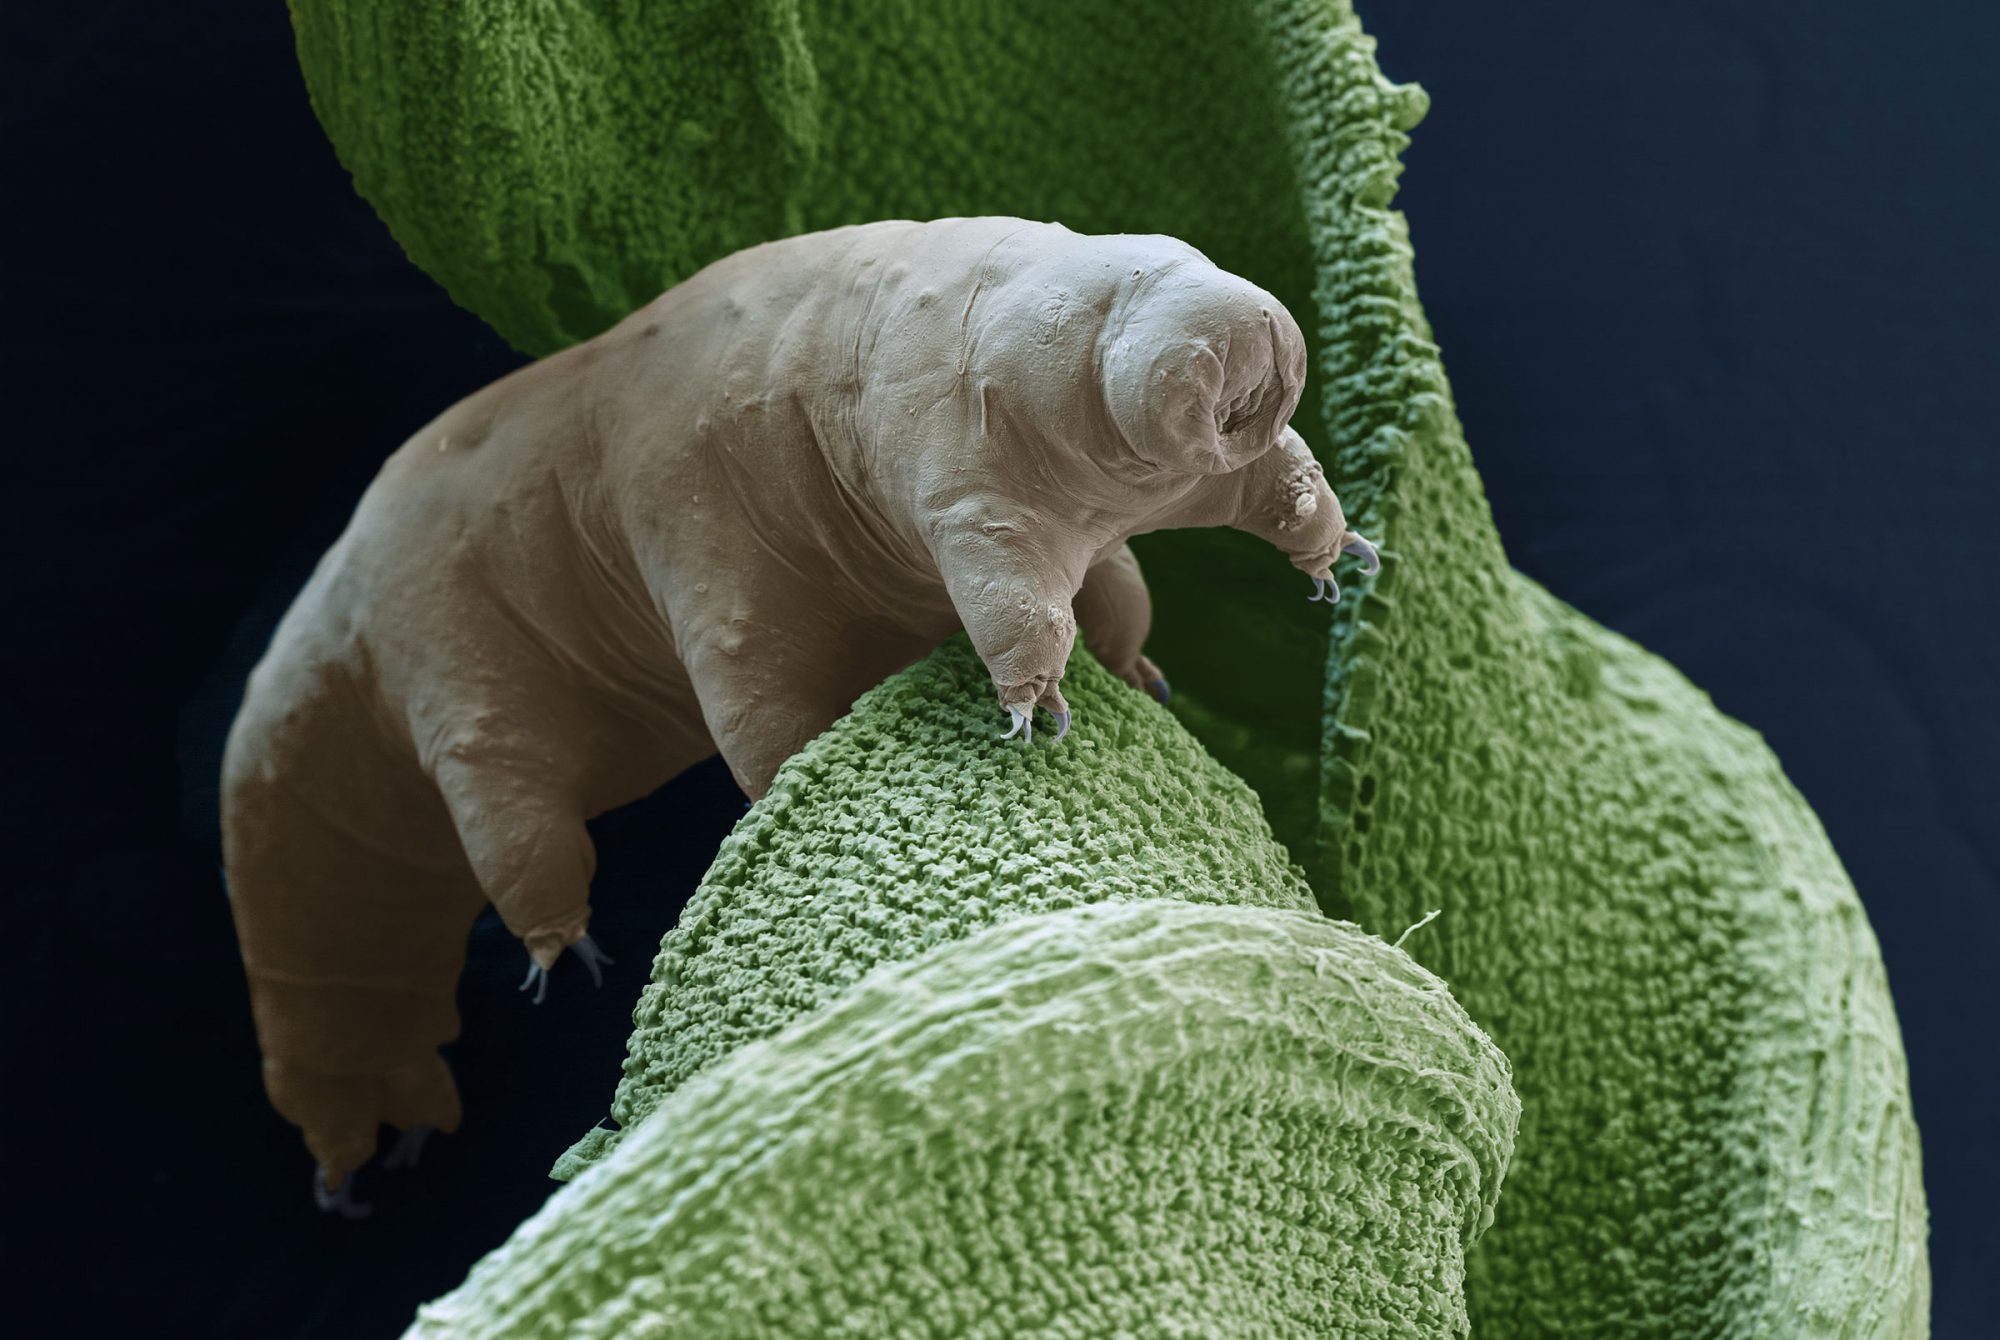 The tardigrade walks on eight stubby legs, with a gait resembling that of insects
500,000 times its size.